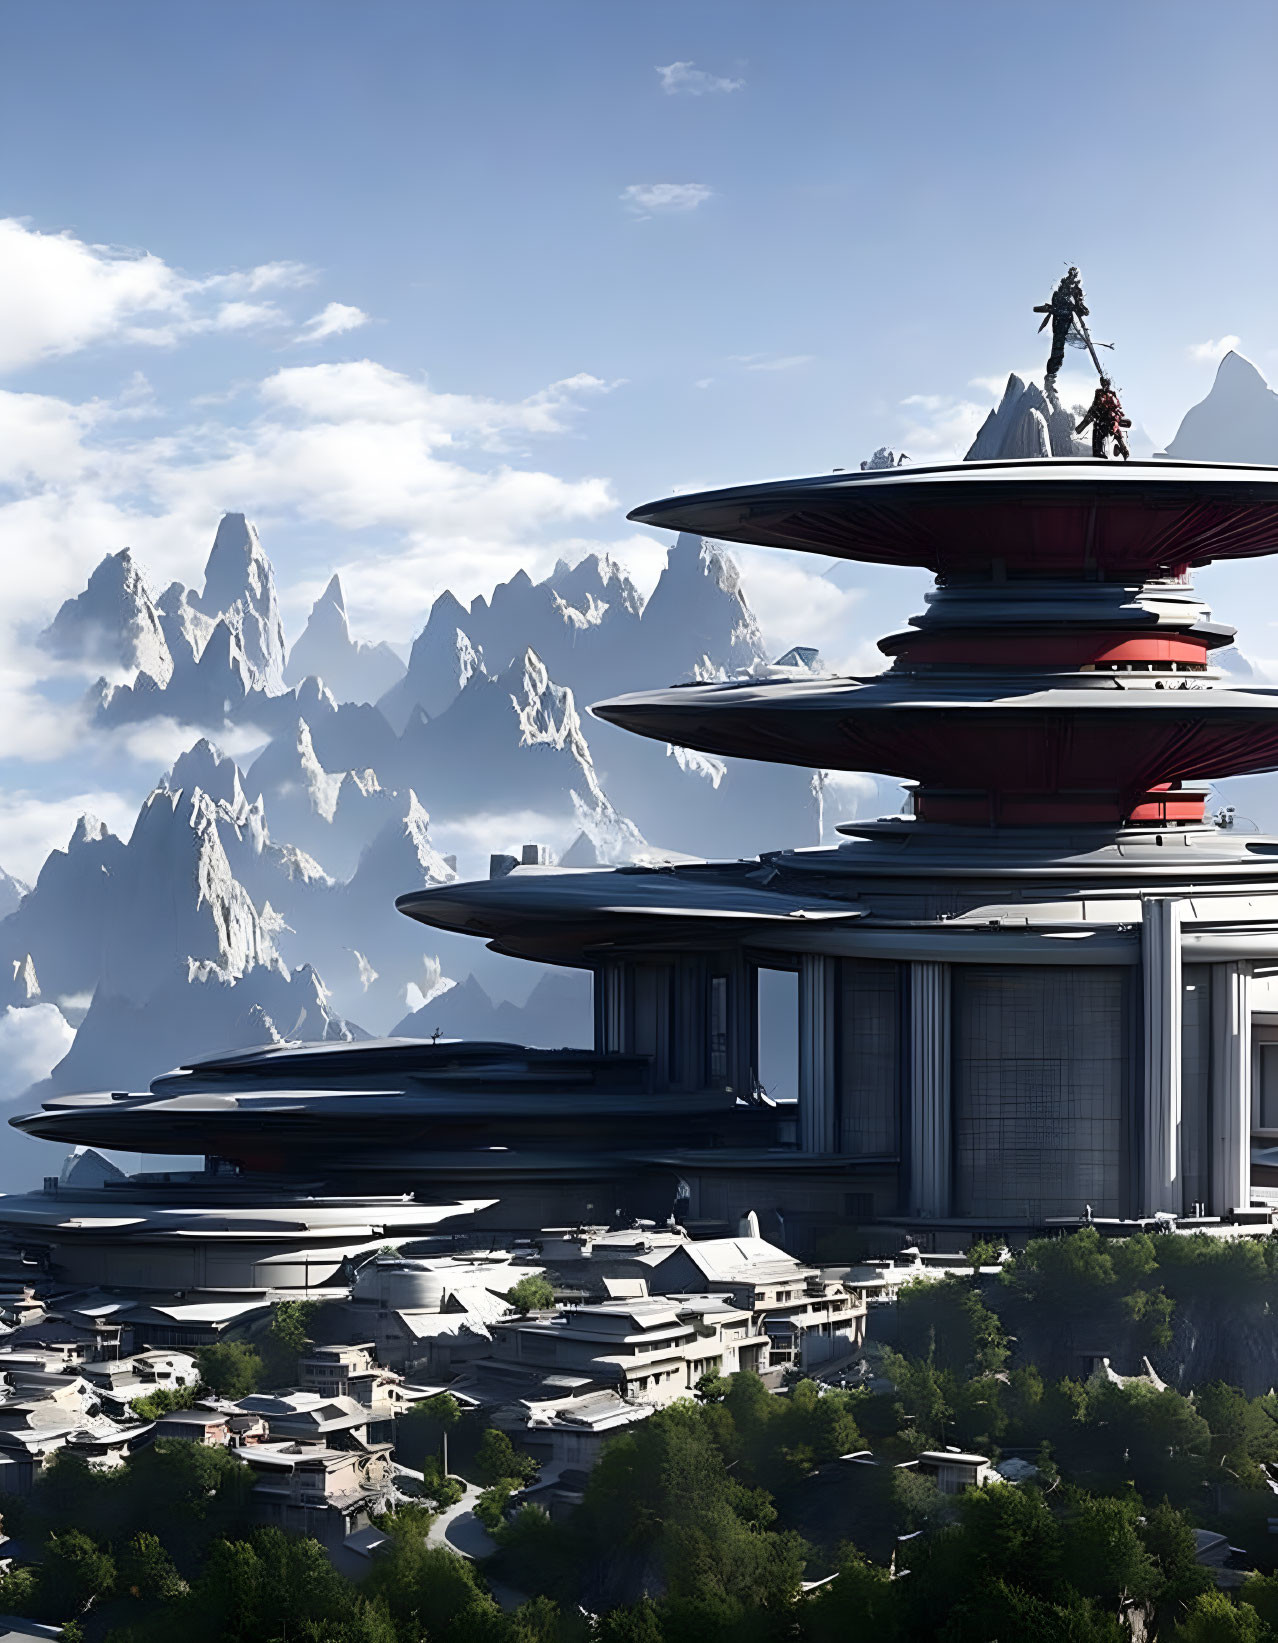 Futuristic city with circular structures in mountainous landscape